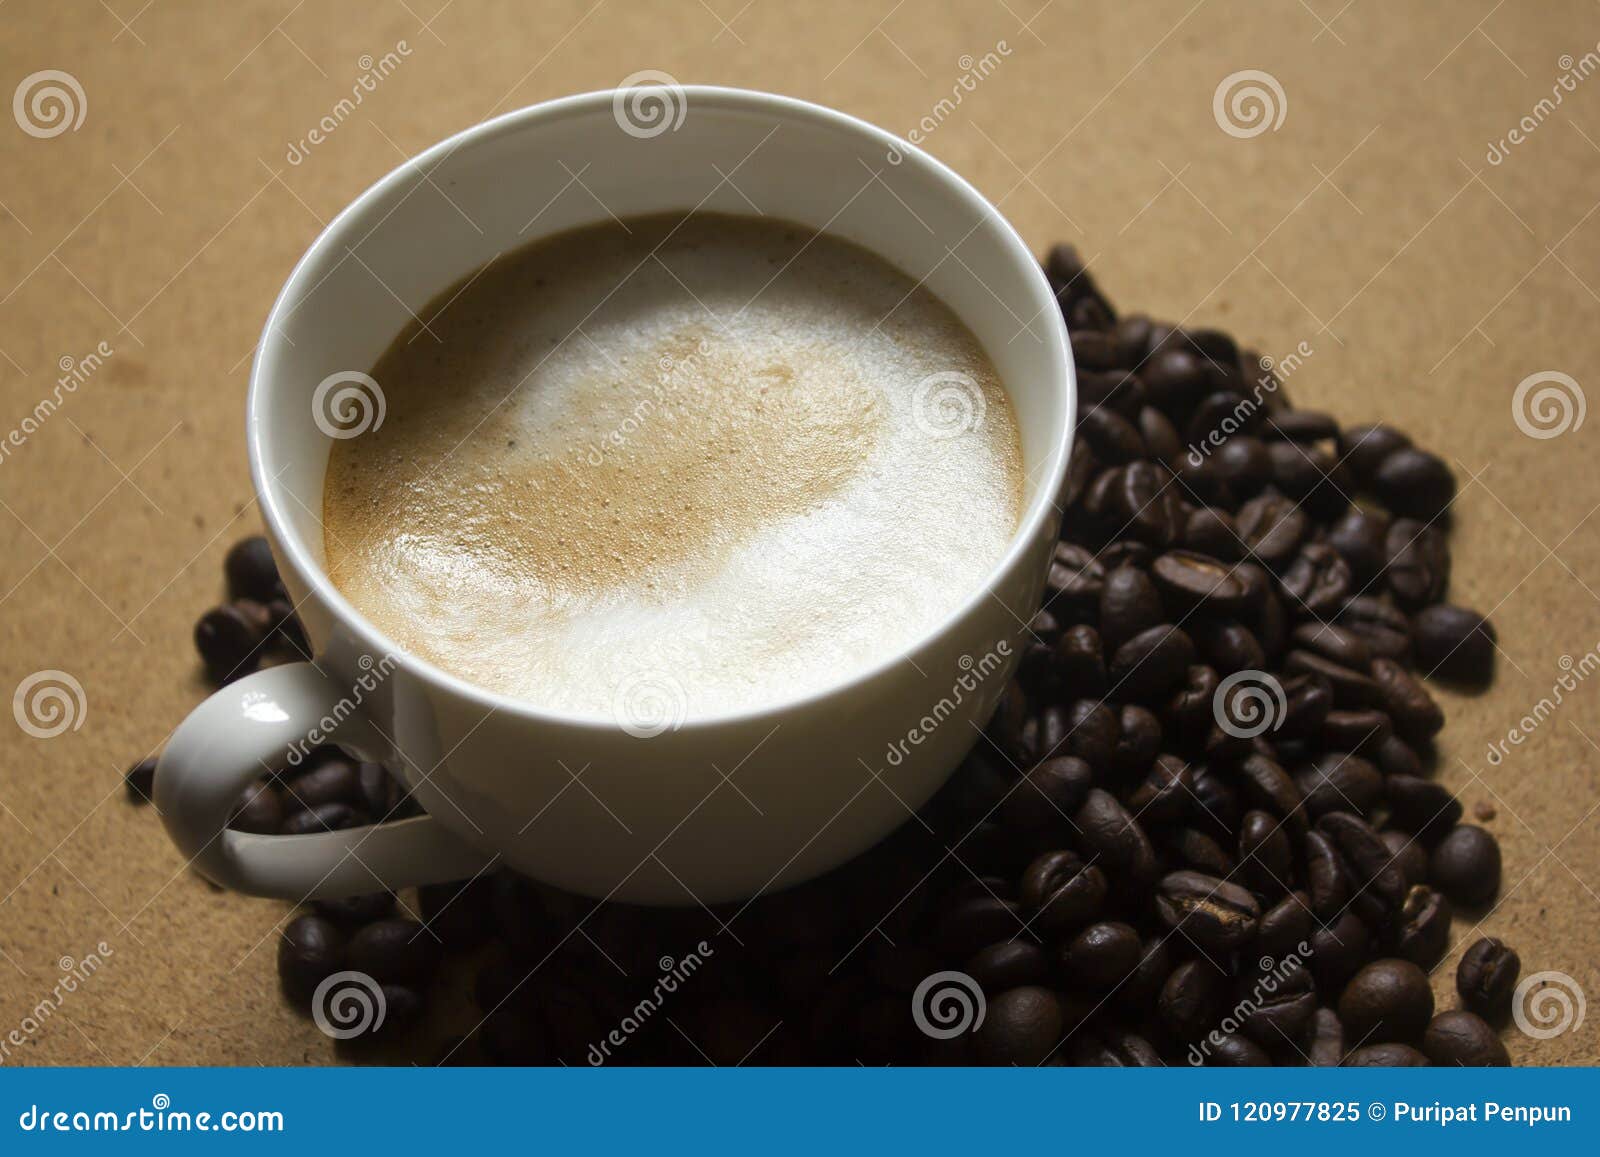 milk froth in coffee mugs and coffee beans